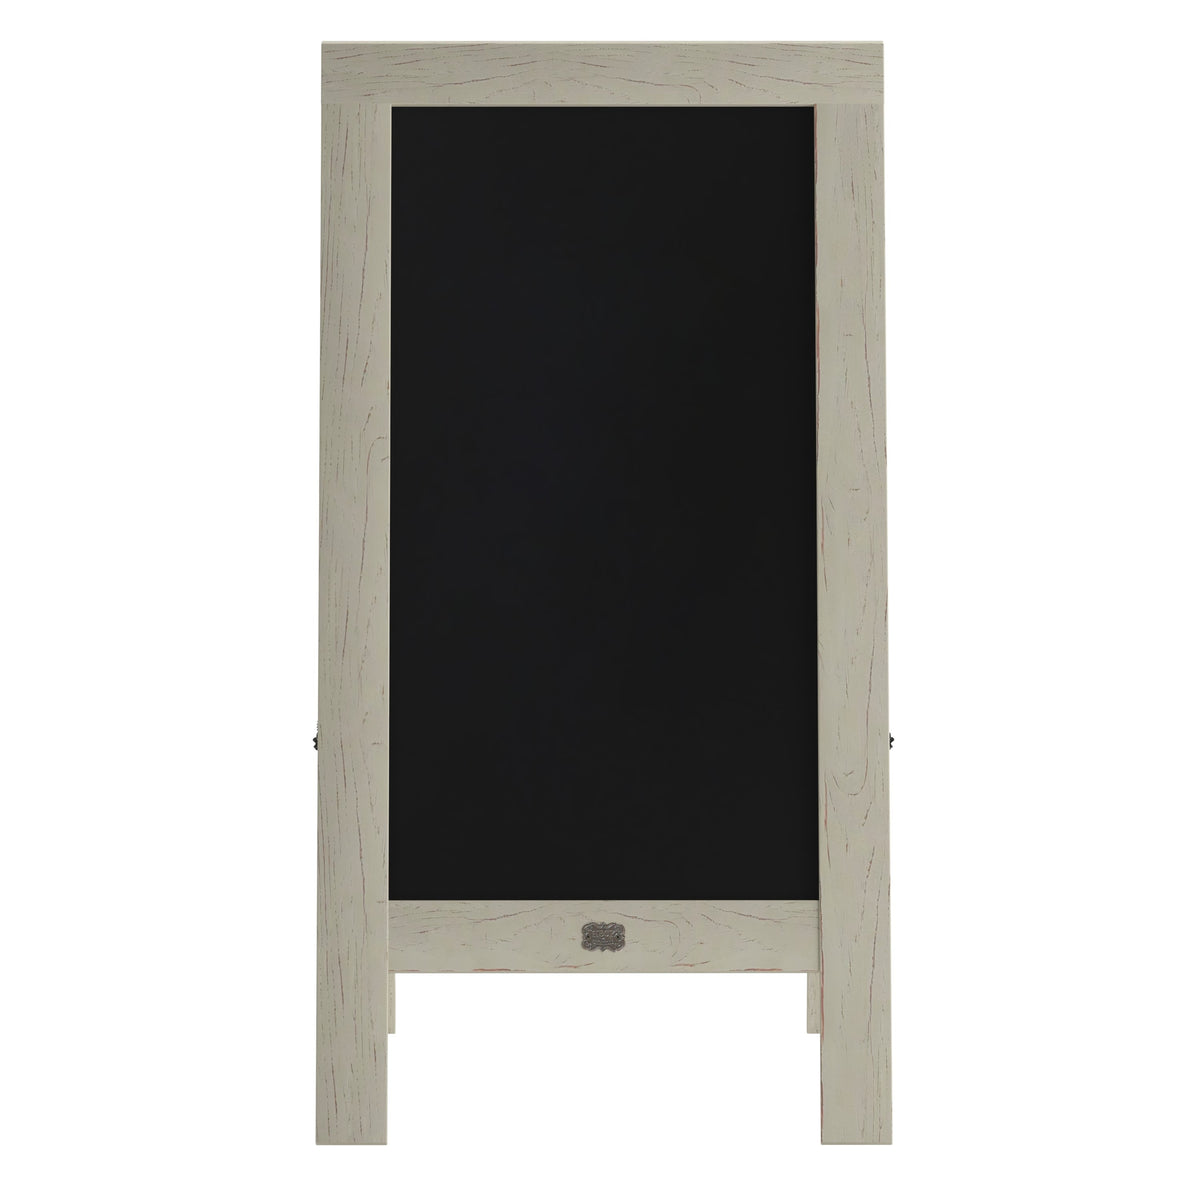 Solid White,40inchH x 20inchW |#| Indoor/Outdoor 40x20 Freestanding White Wood A-Frame Magnetic Chalkboard